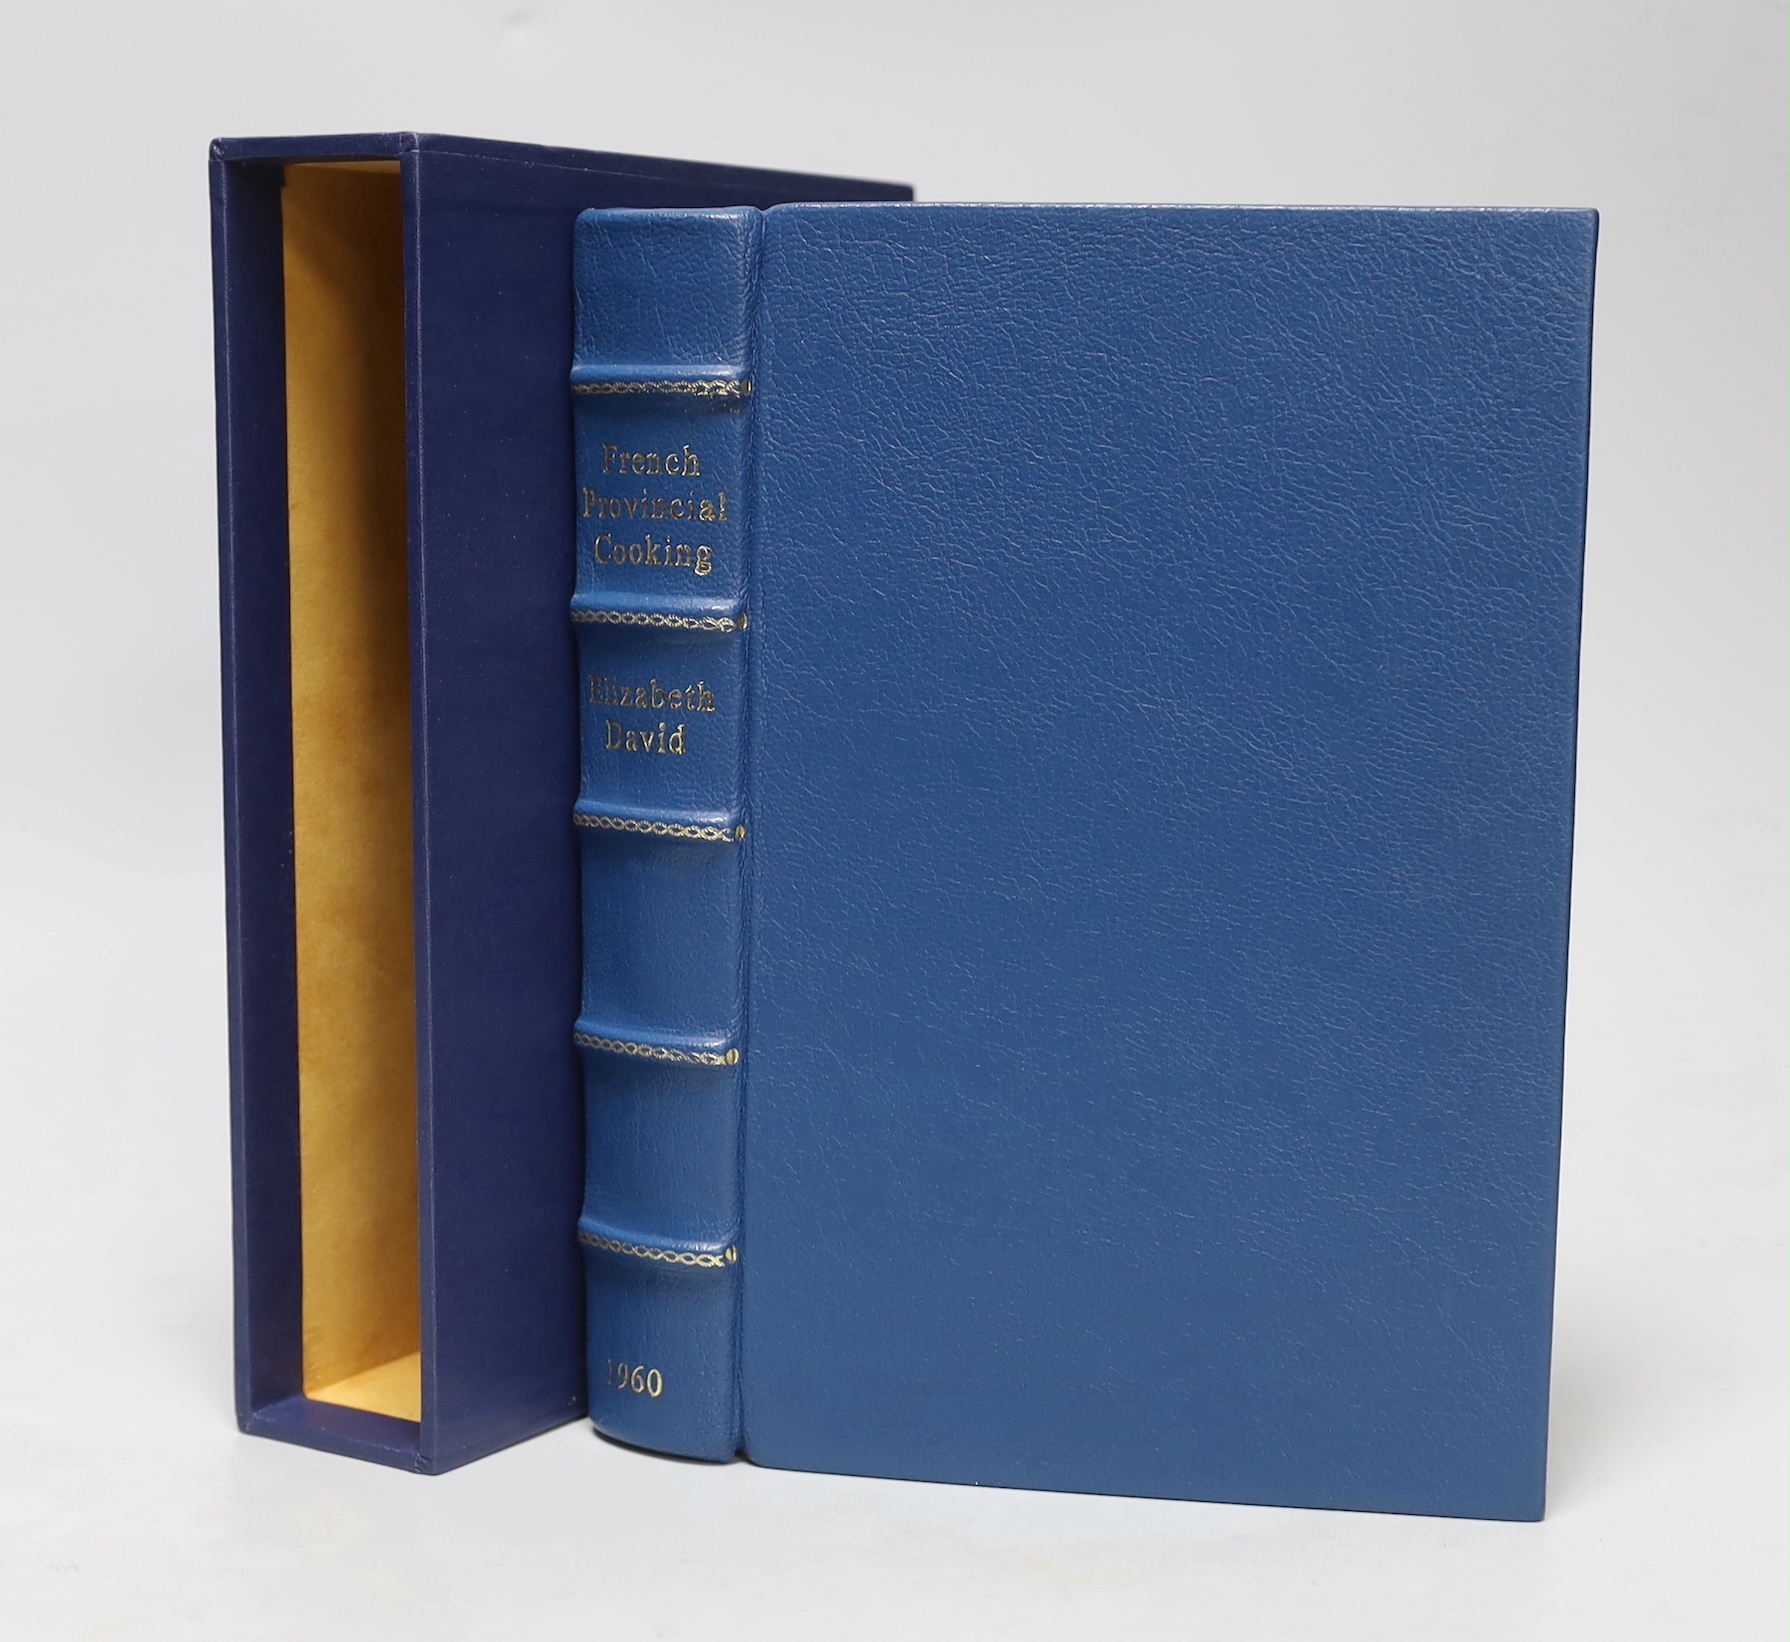 David, Elizabeth - French Provincial Cooking, 1st edition, illustrated by Juliet Renny, 8vo, in fine blue morocco binding, the spine with five raised bands, marbled end-papers, Michael Joseph, London, 1960.